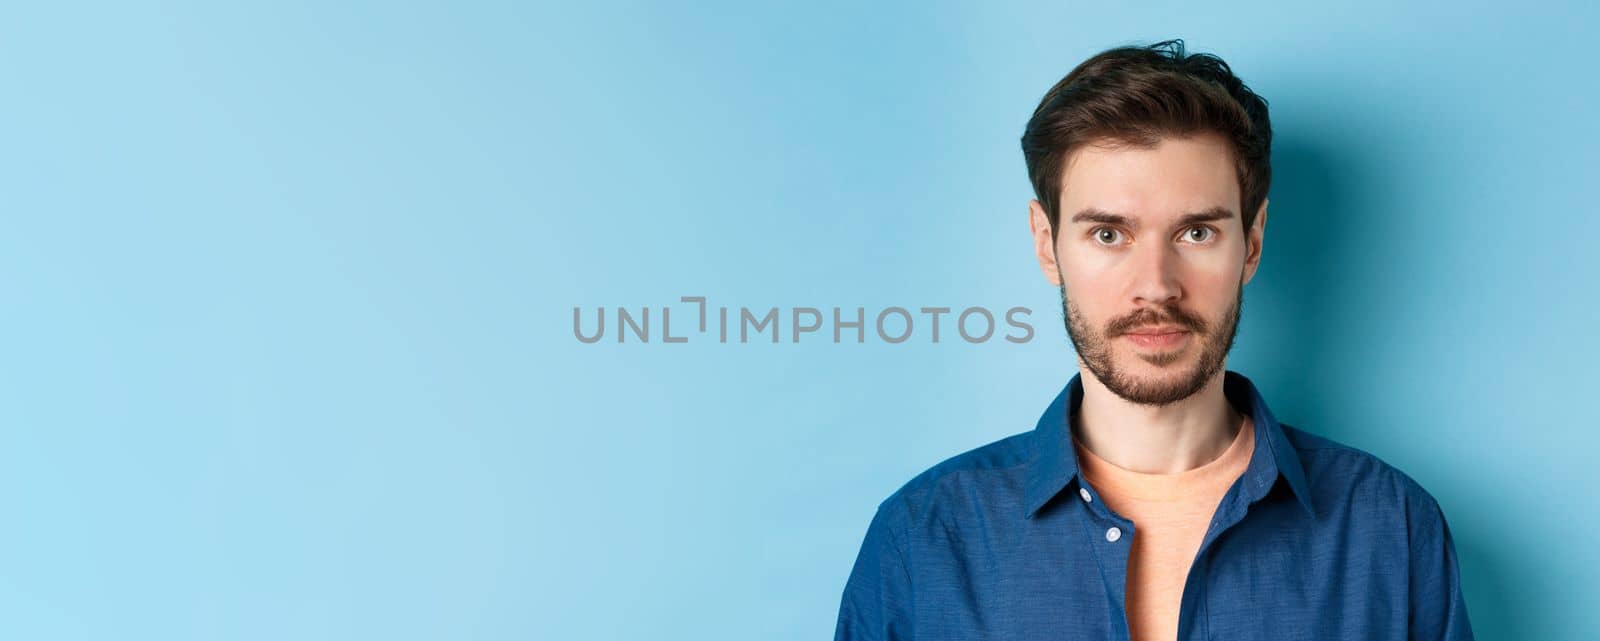 Close-up of young man with beard looking serious at camera, standing in casual shirt on blue background.